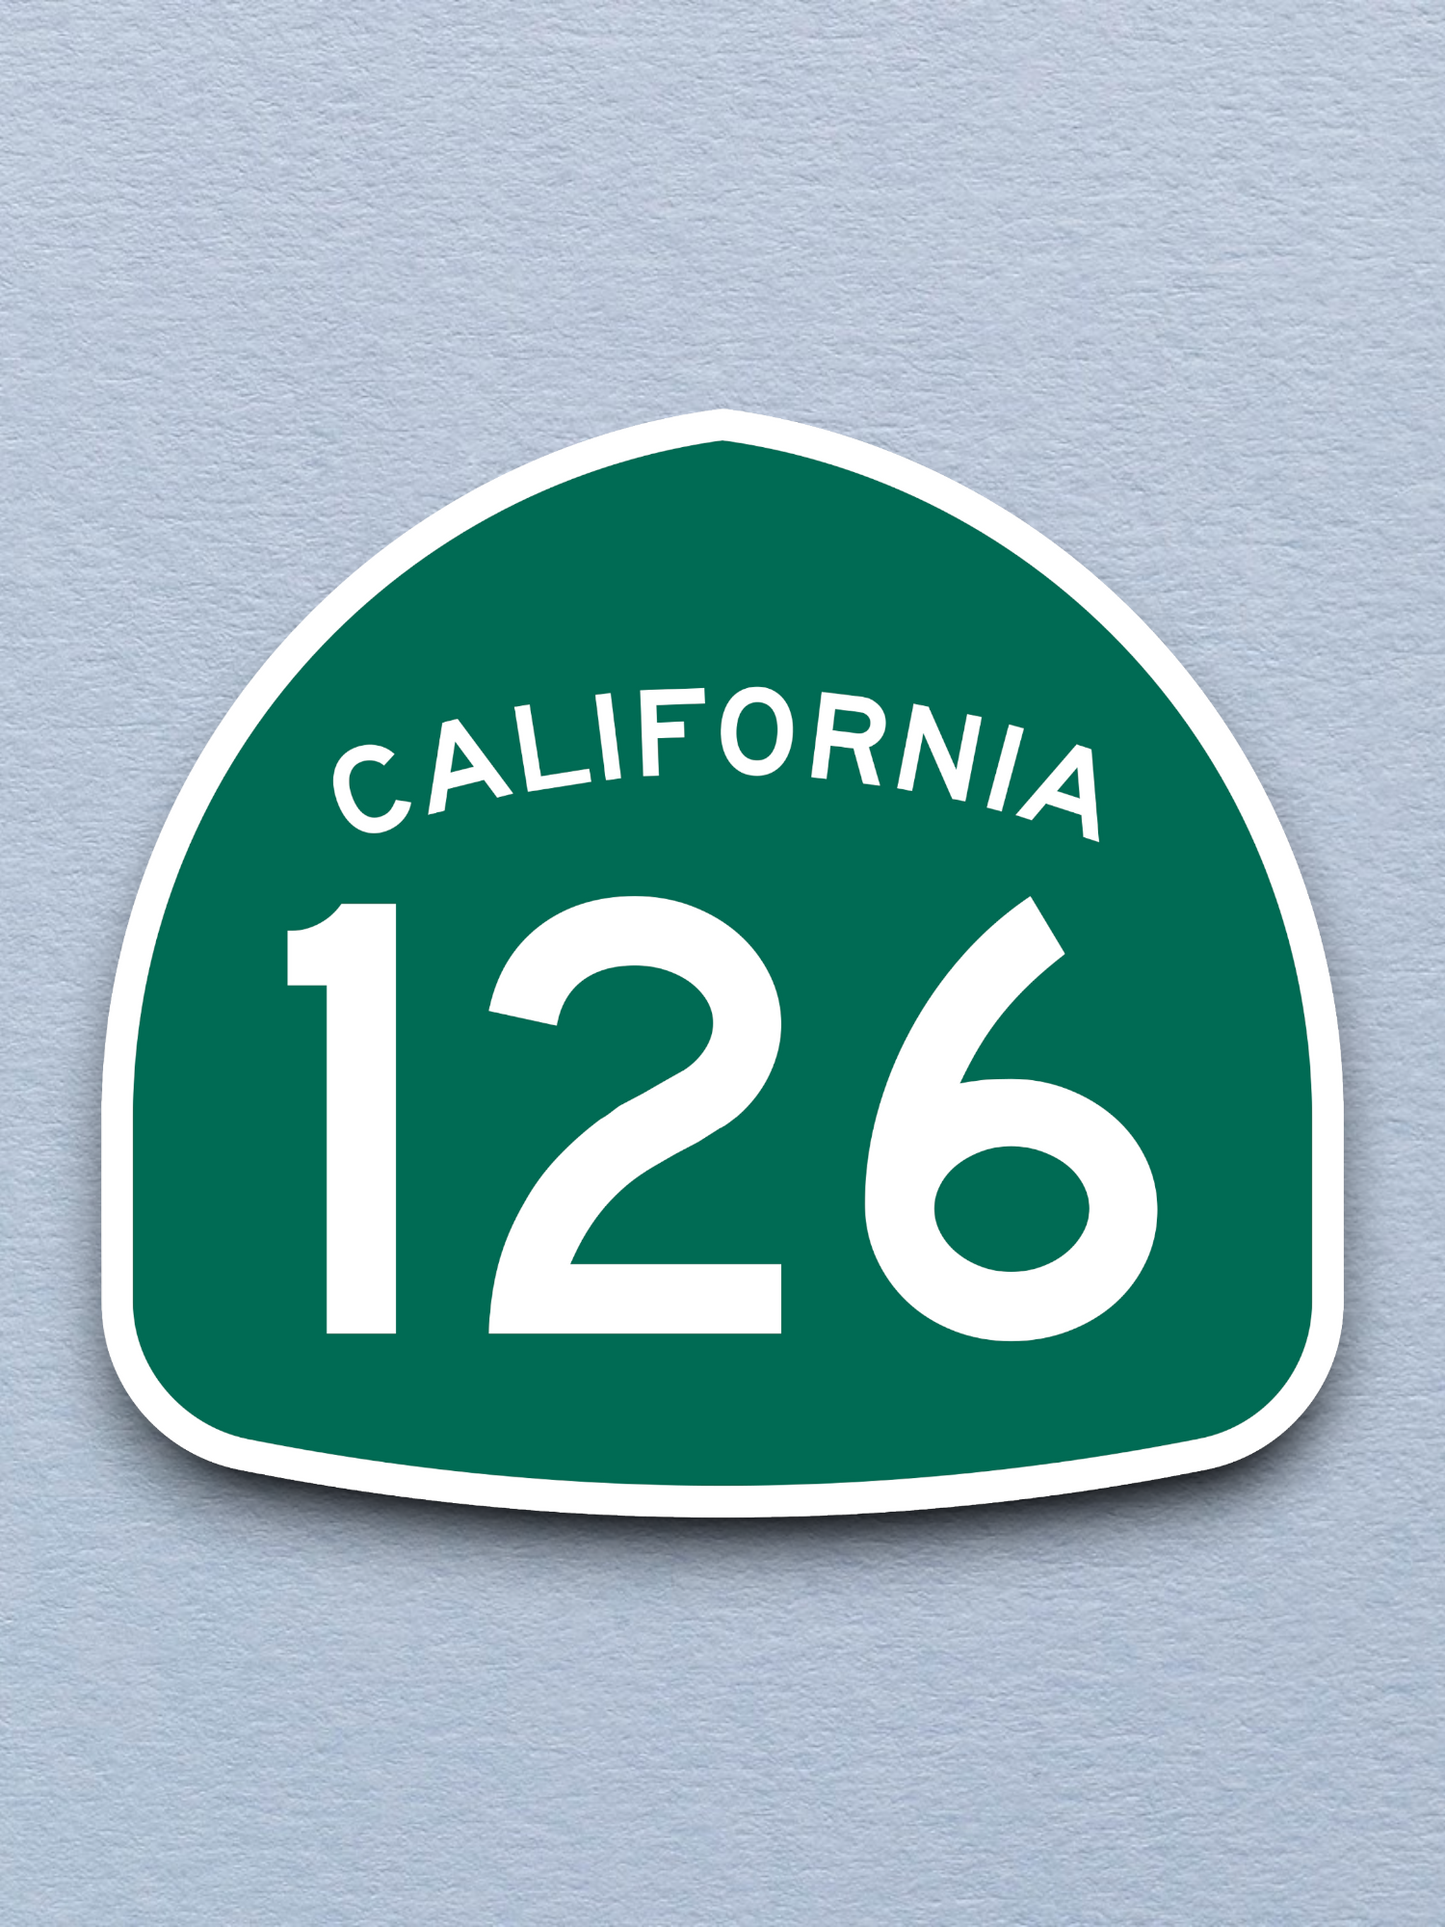 California State Route 126 Road Sign Sticker